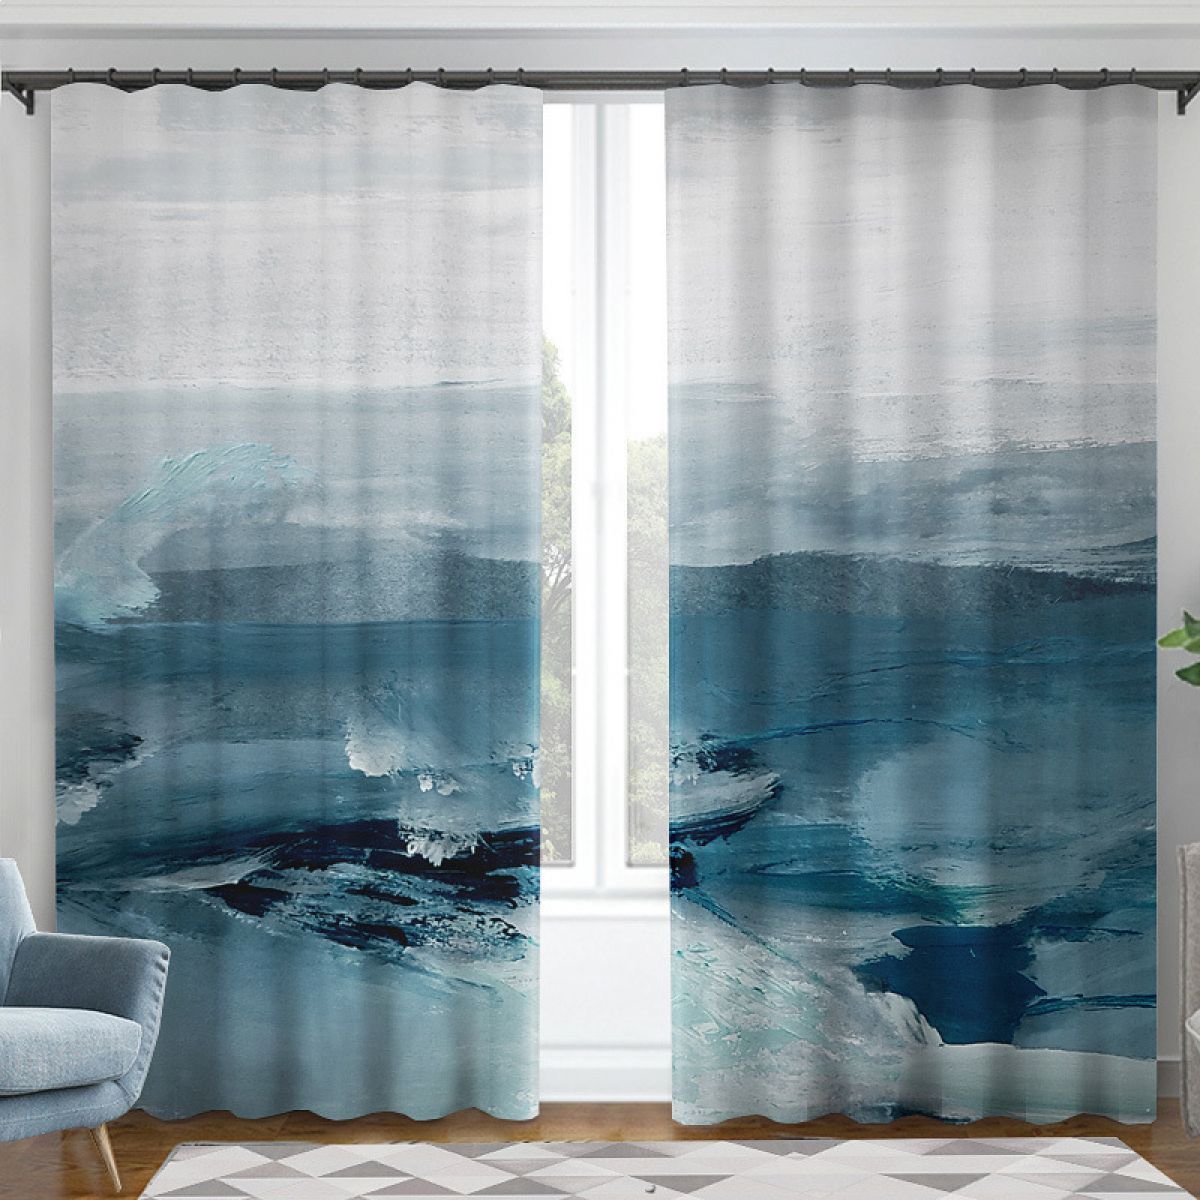 3d Abstract Oil Painting Iceberg Printed Window Curtain Home Decor